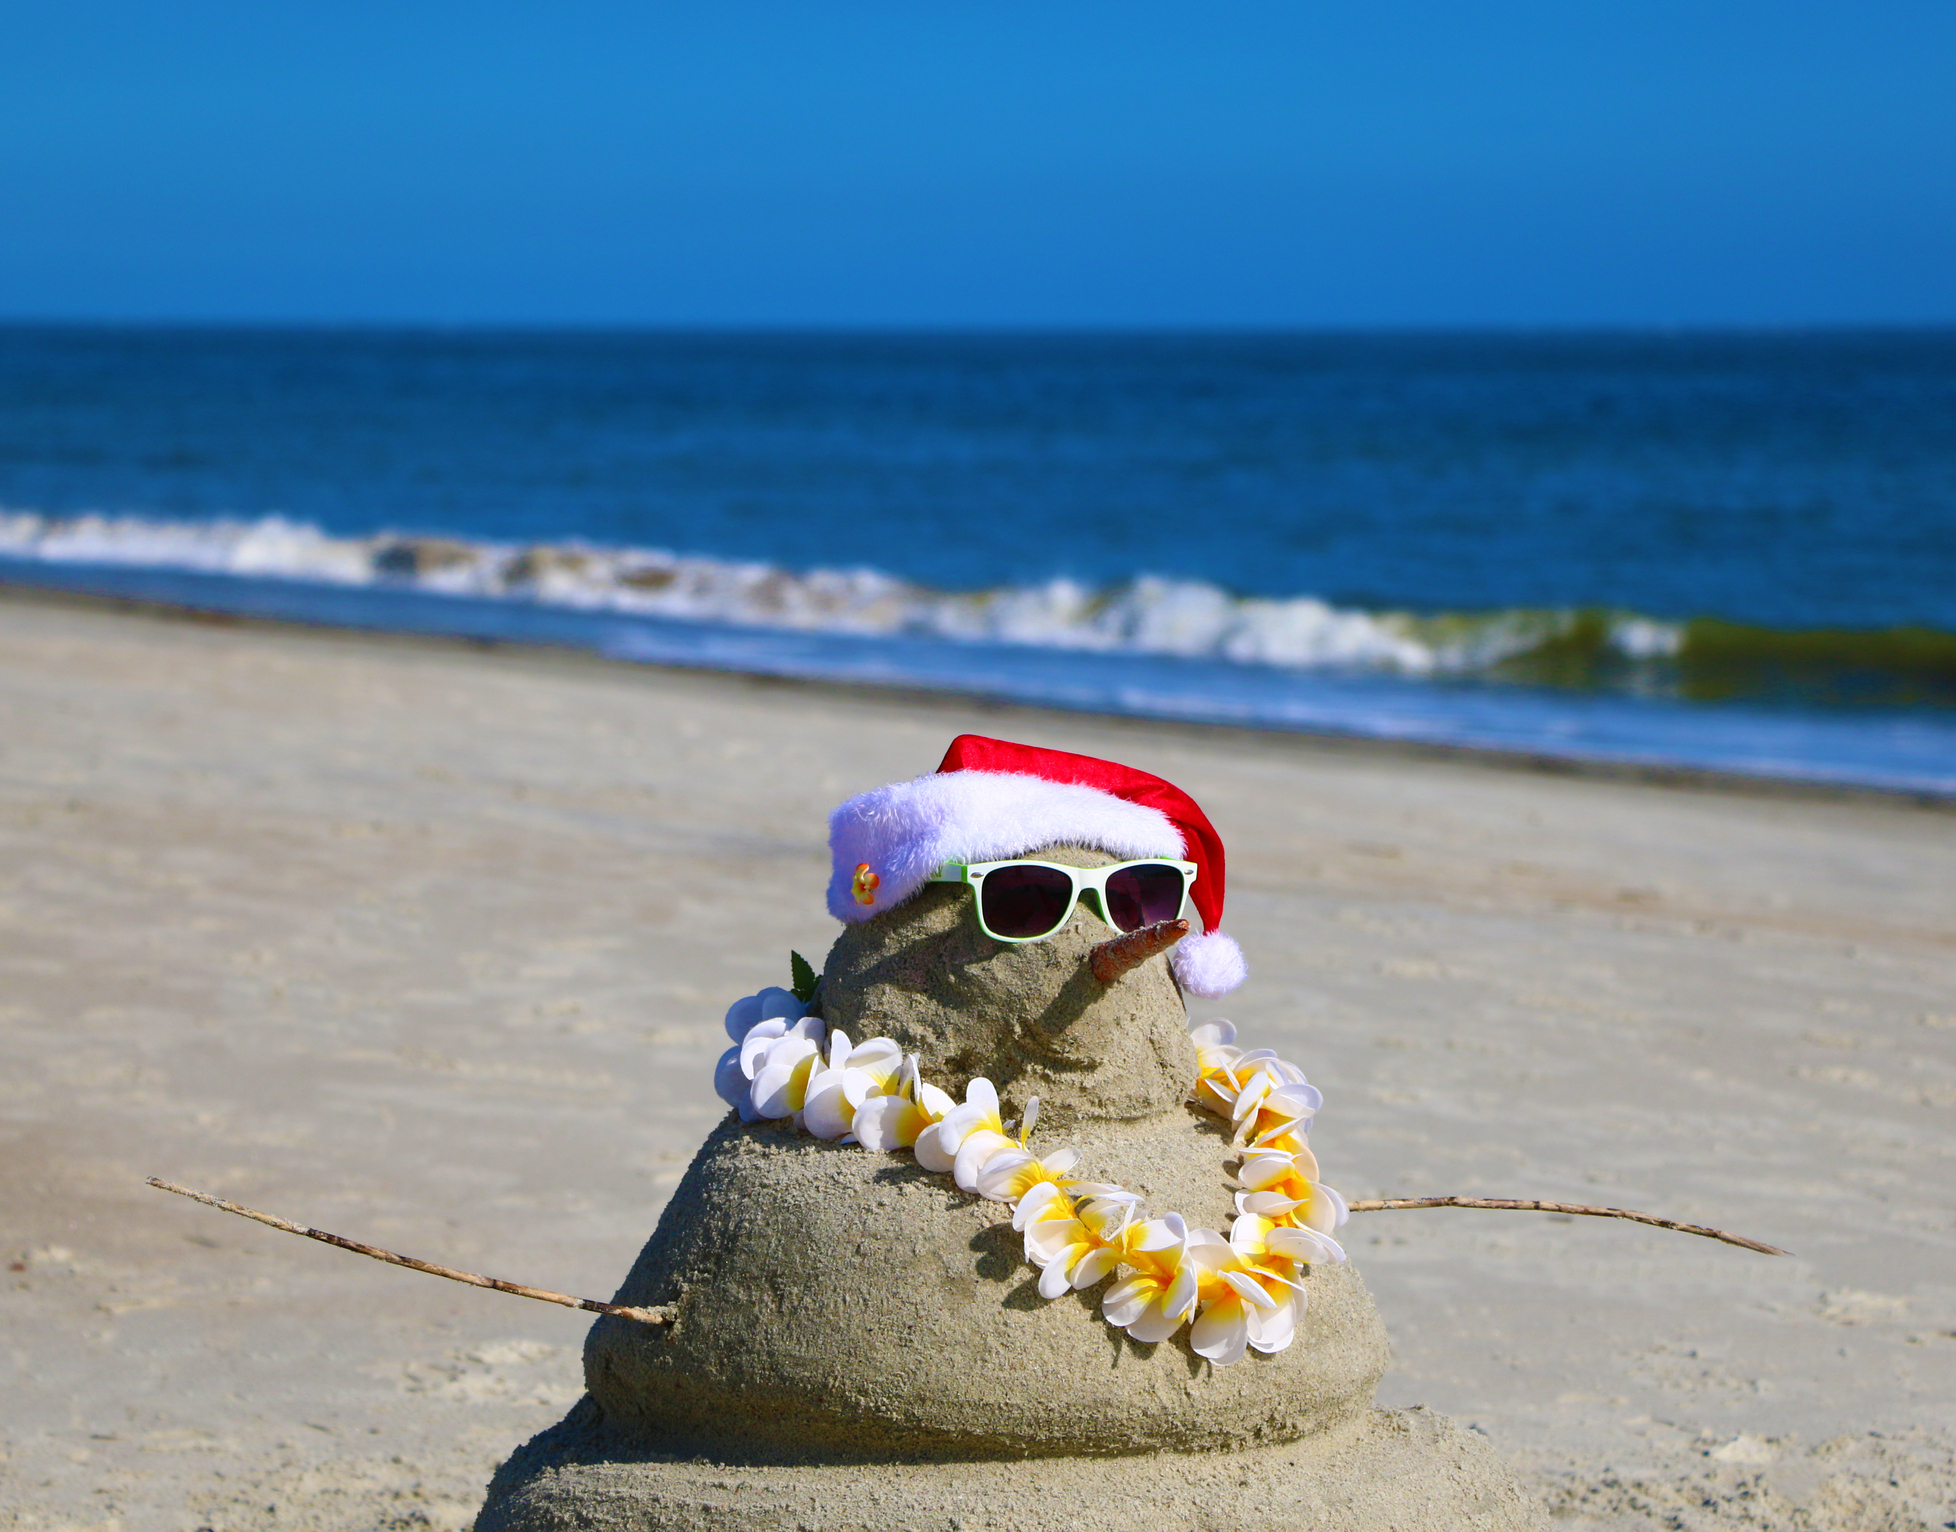 Snowman made of sand on a beach for a tropical Christmas holiday.